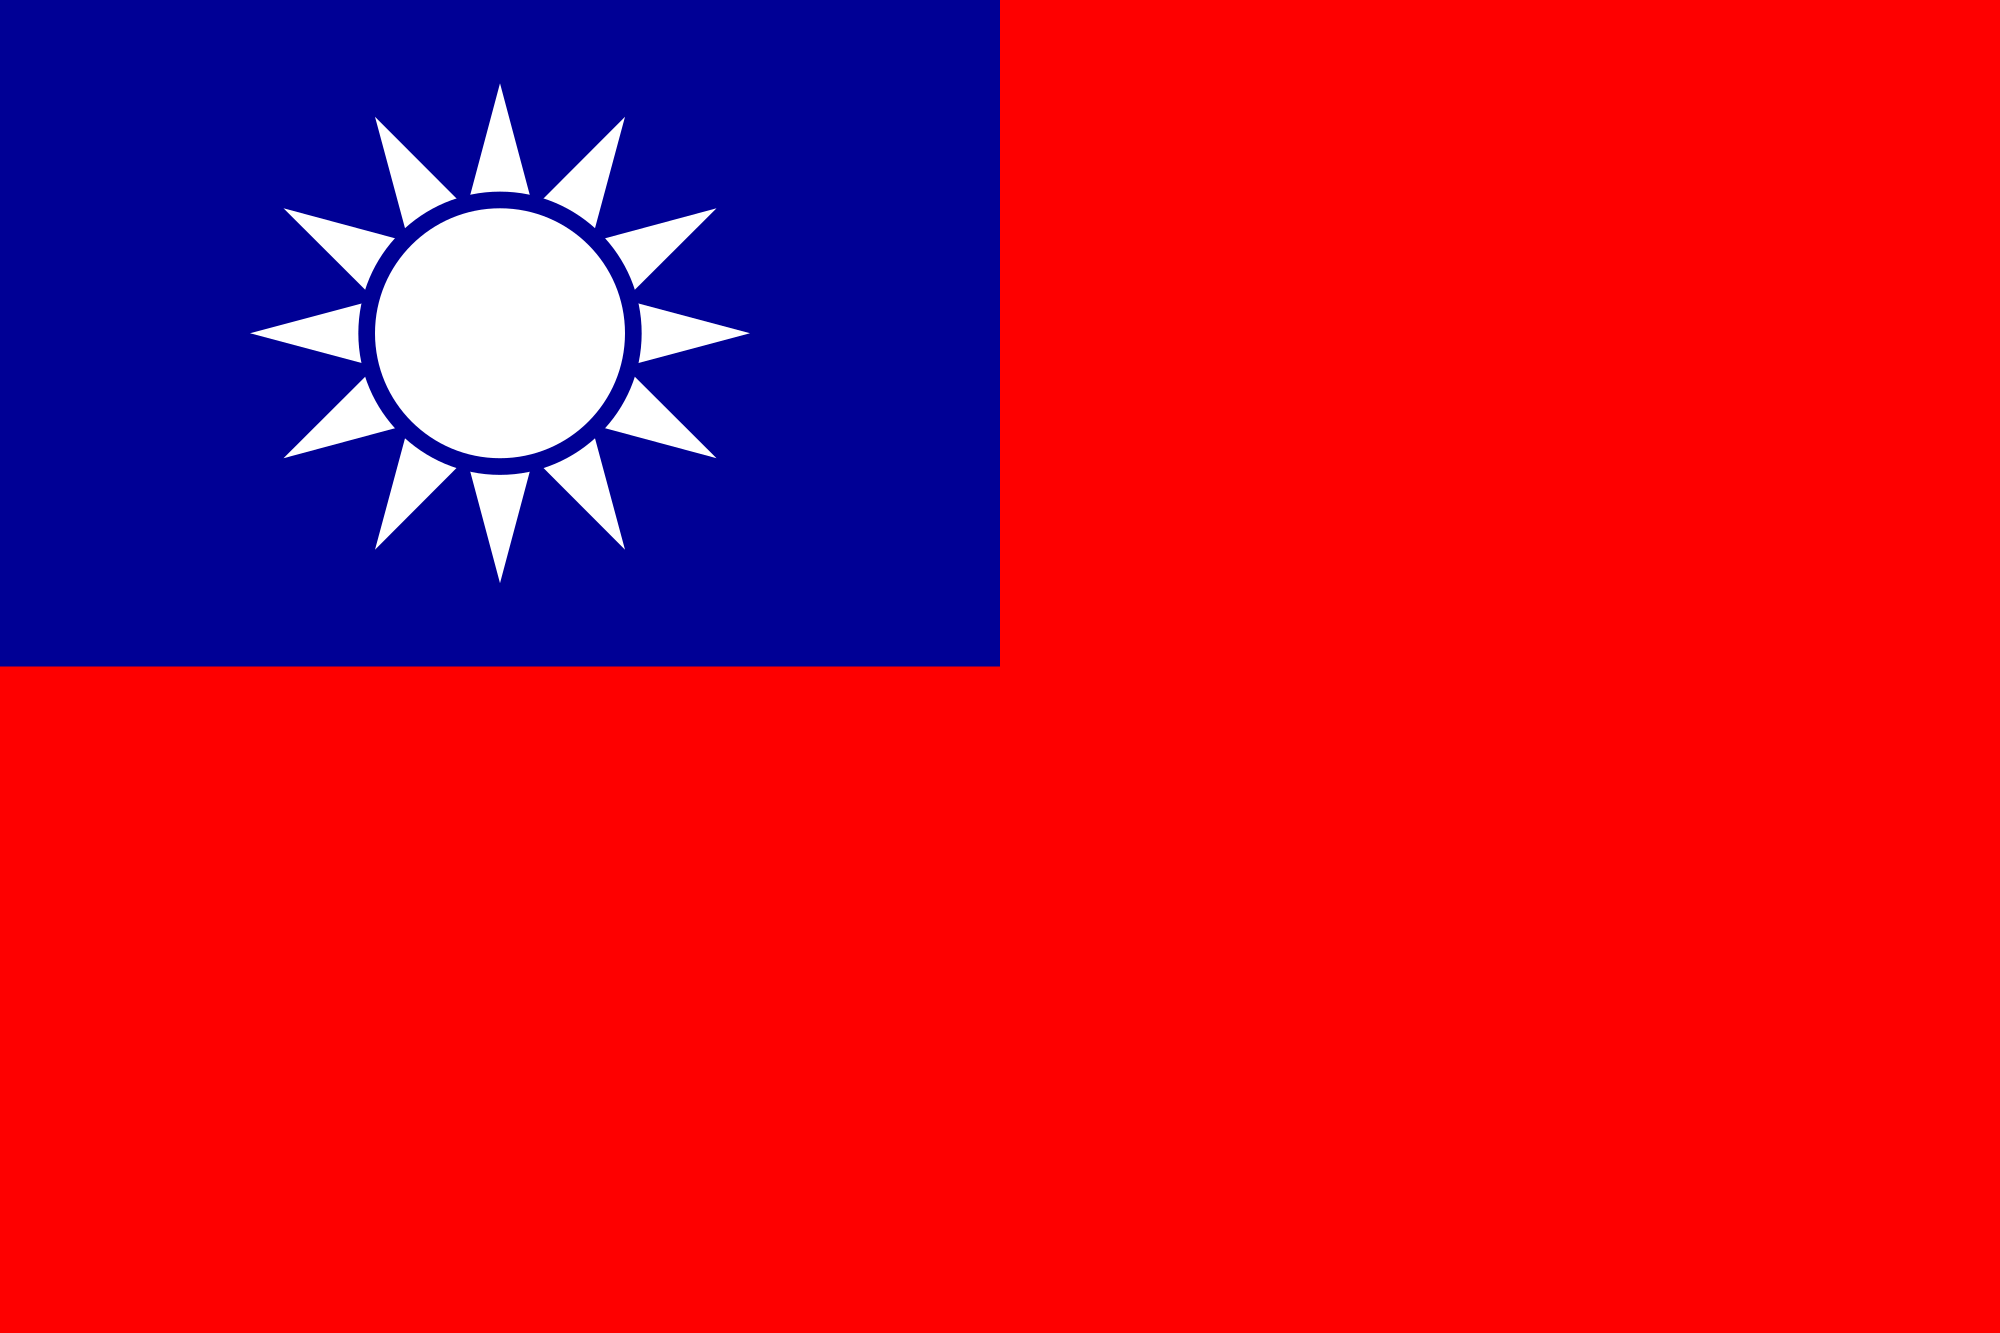 Chinese Blue and Red Logo - Flag of the Republic of China